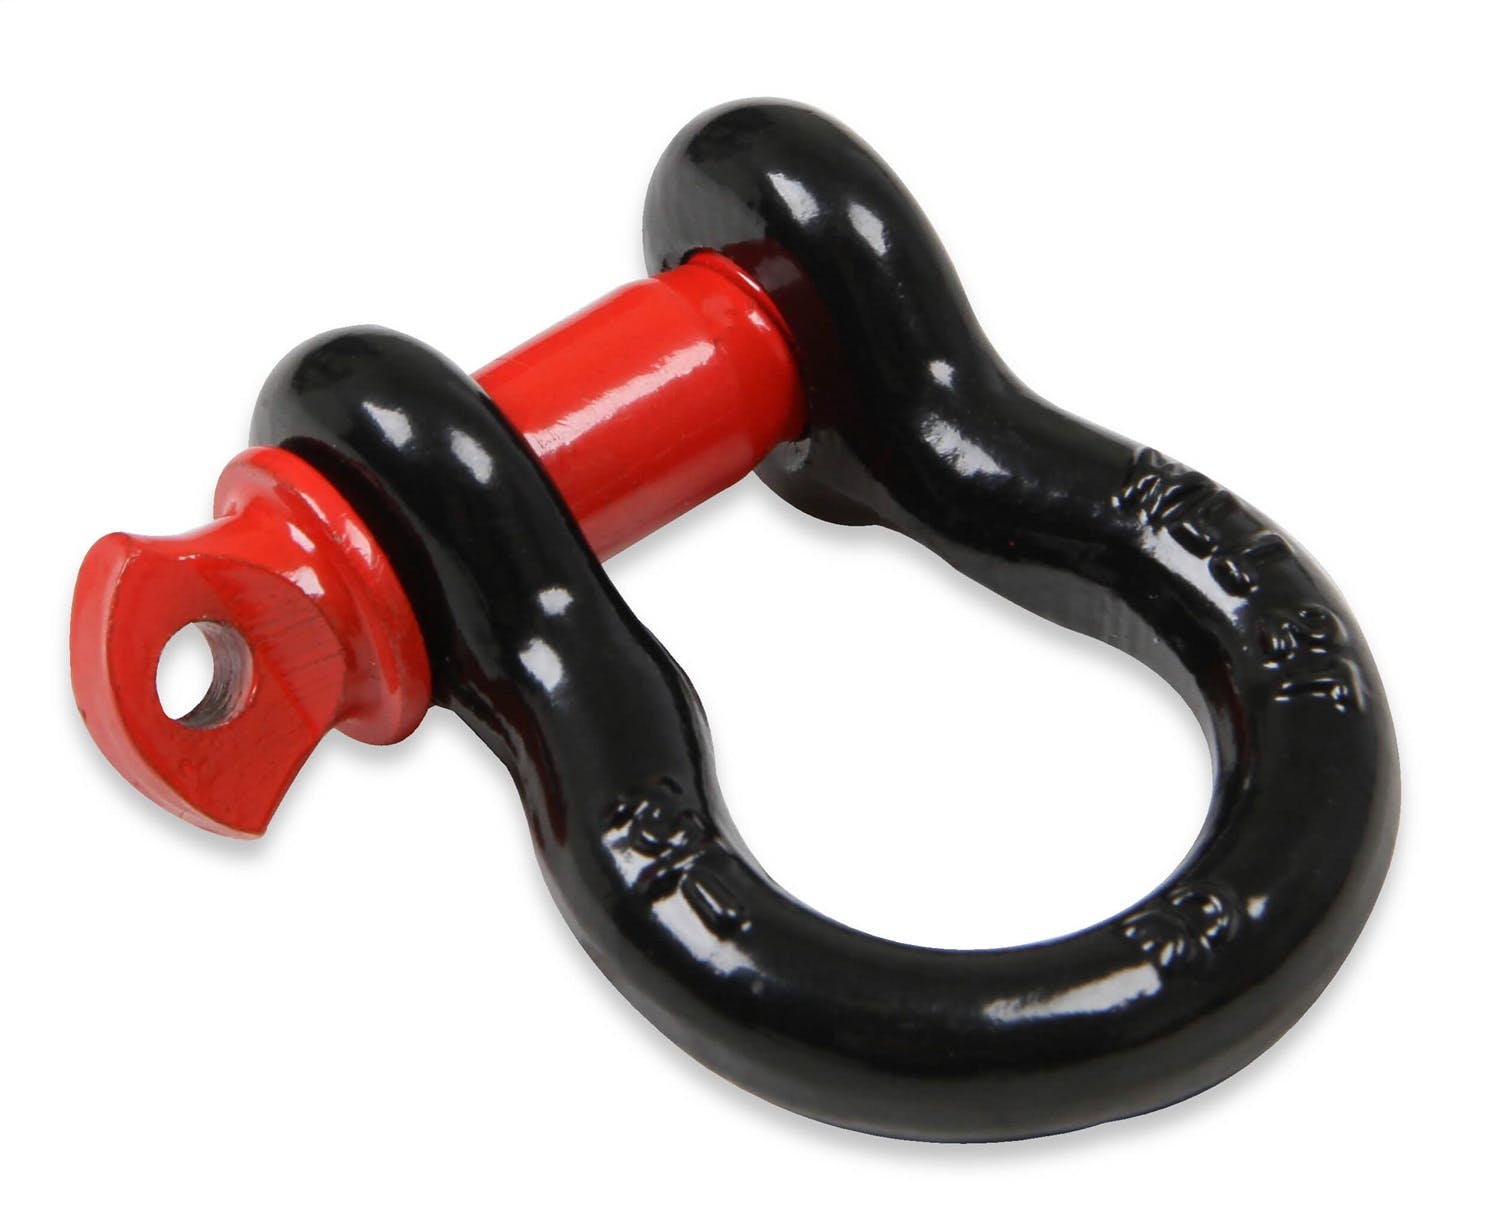 Anvil Off-Road 1093AOR BOW SHACKLE 1/2 IN. 4K LBS BLACK